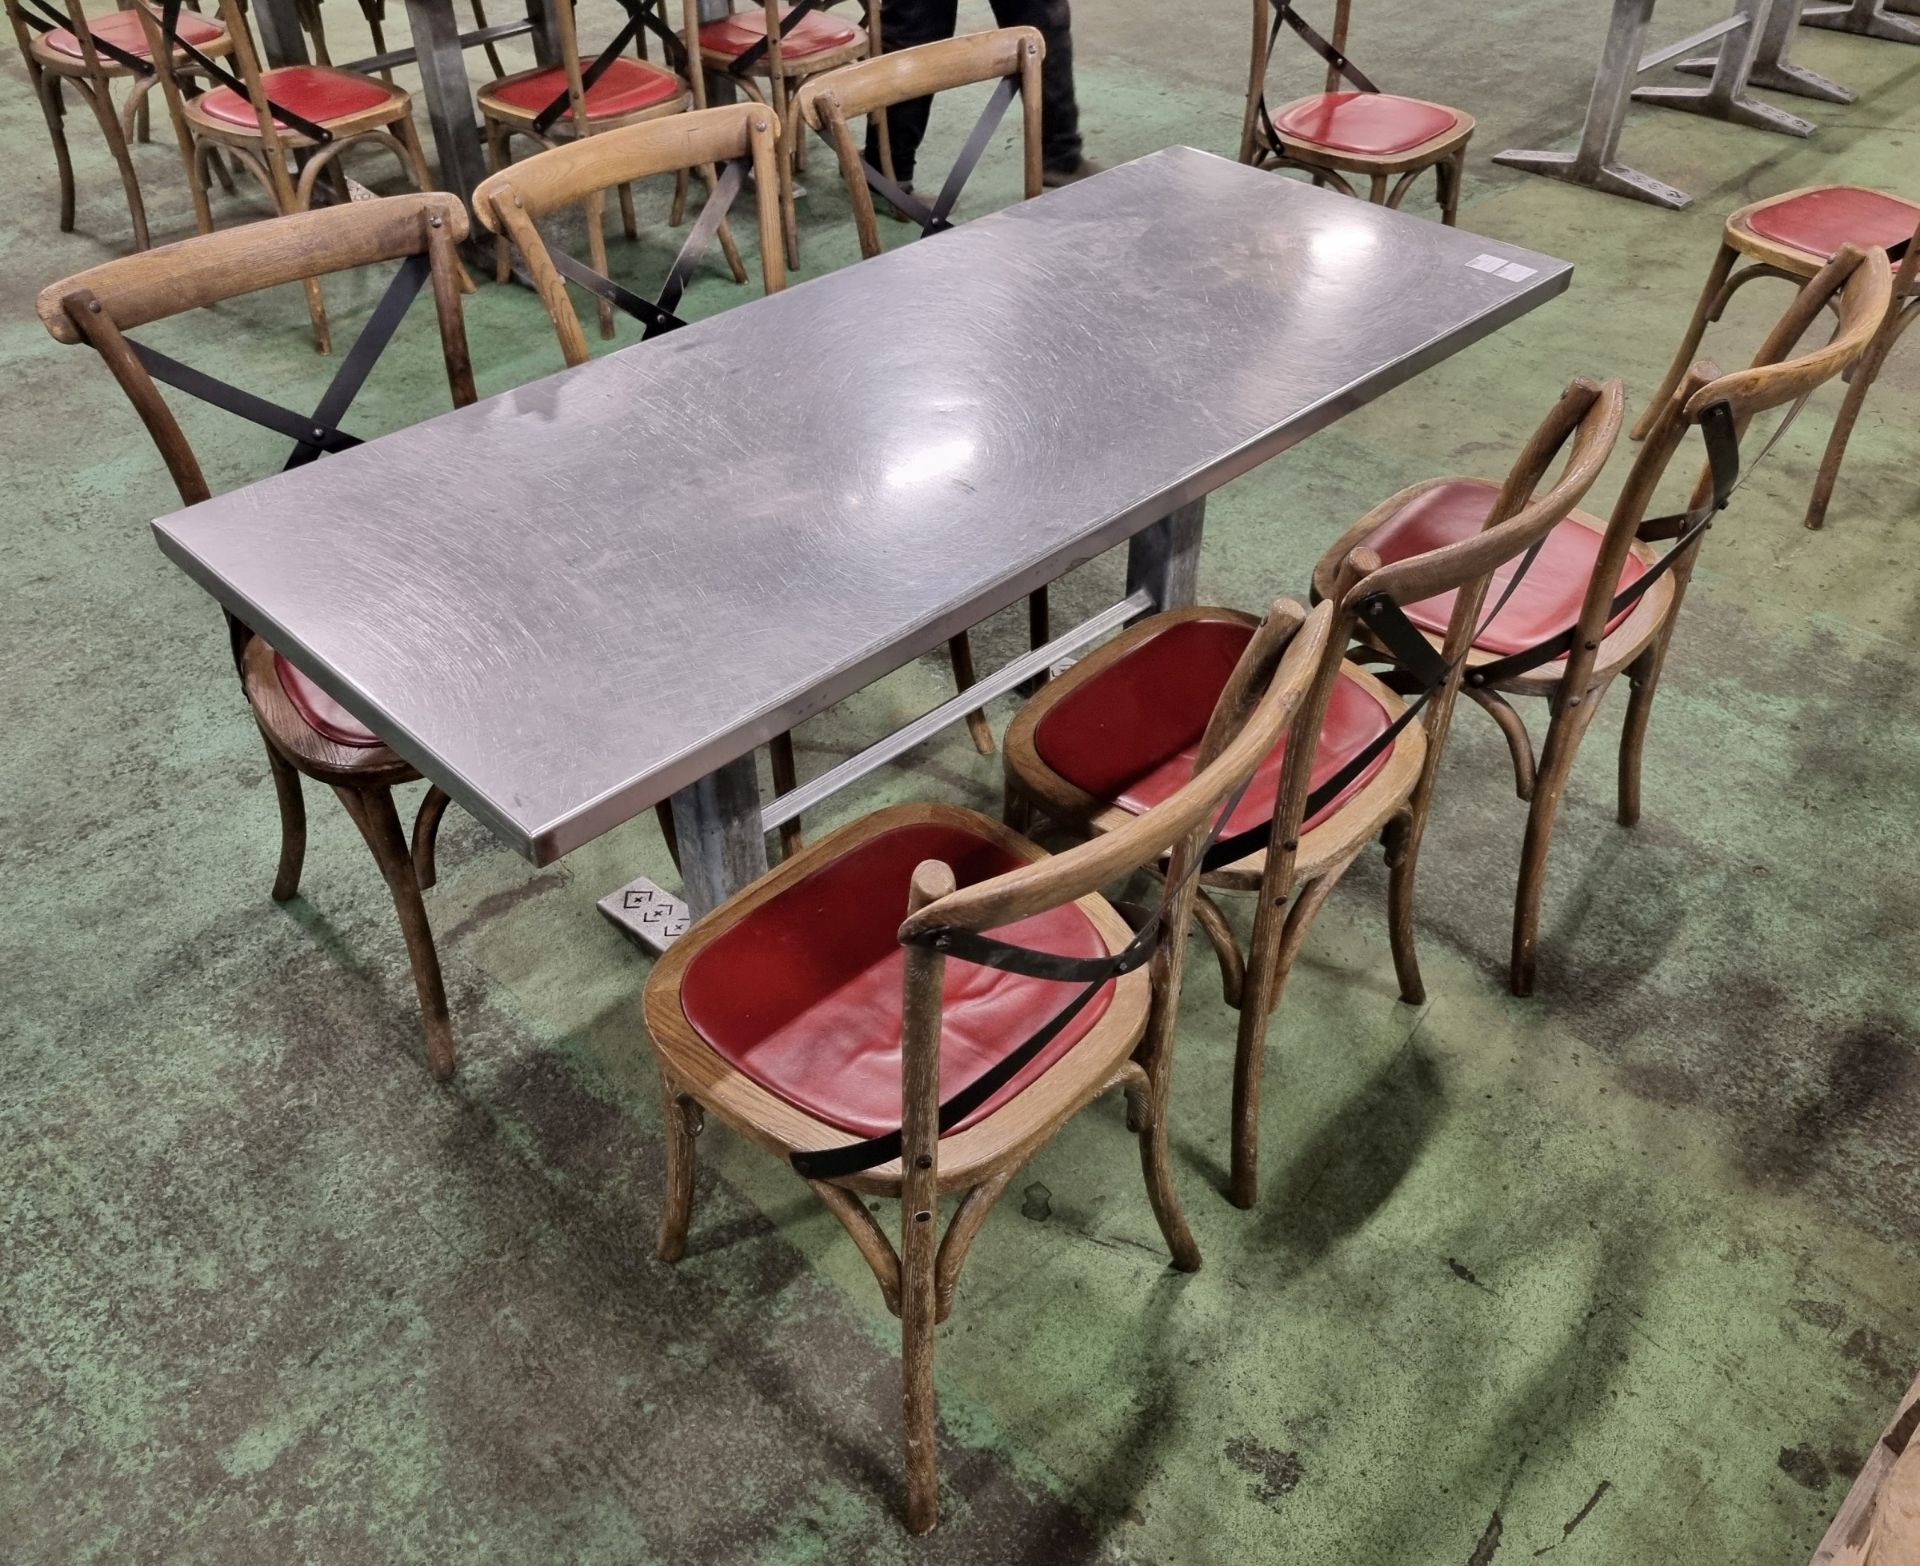 6x Wooden restaurant chairs, Metal table - W 1610 x D 690 x H 760 mm - Image 5 of 5